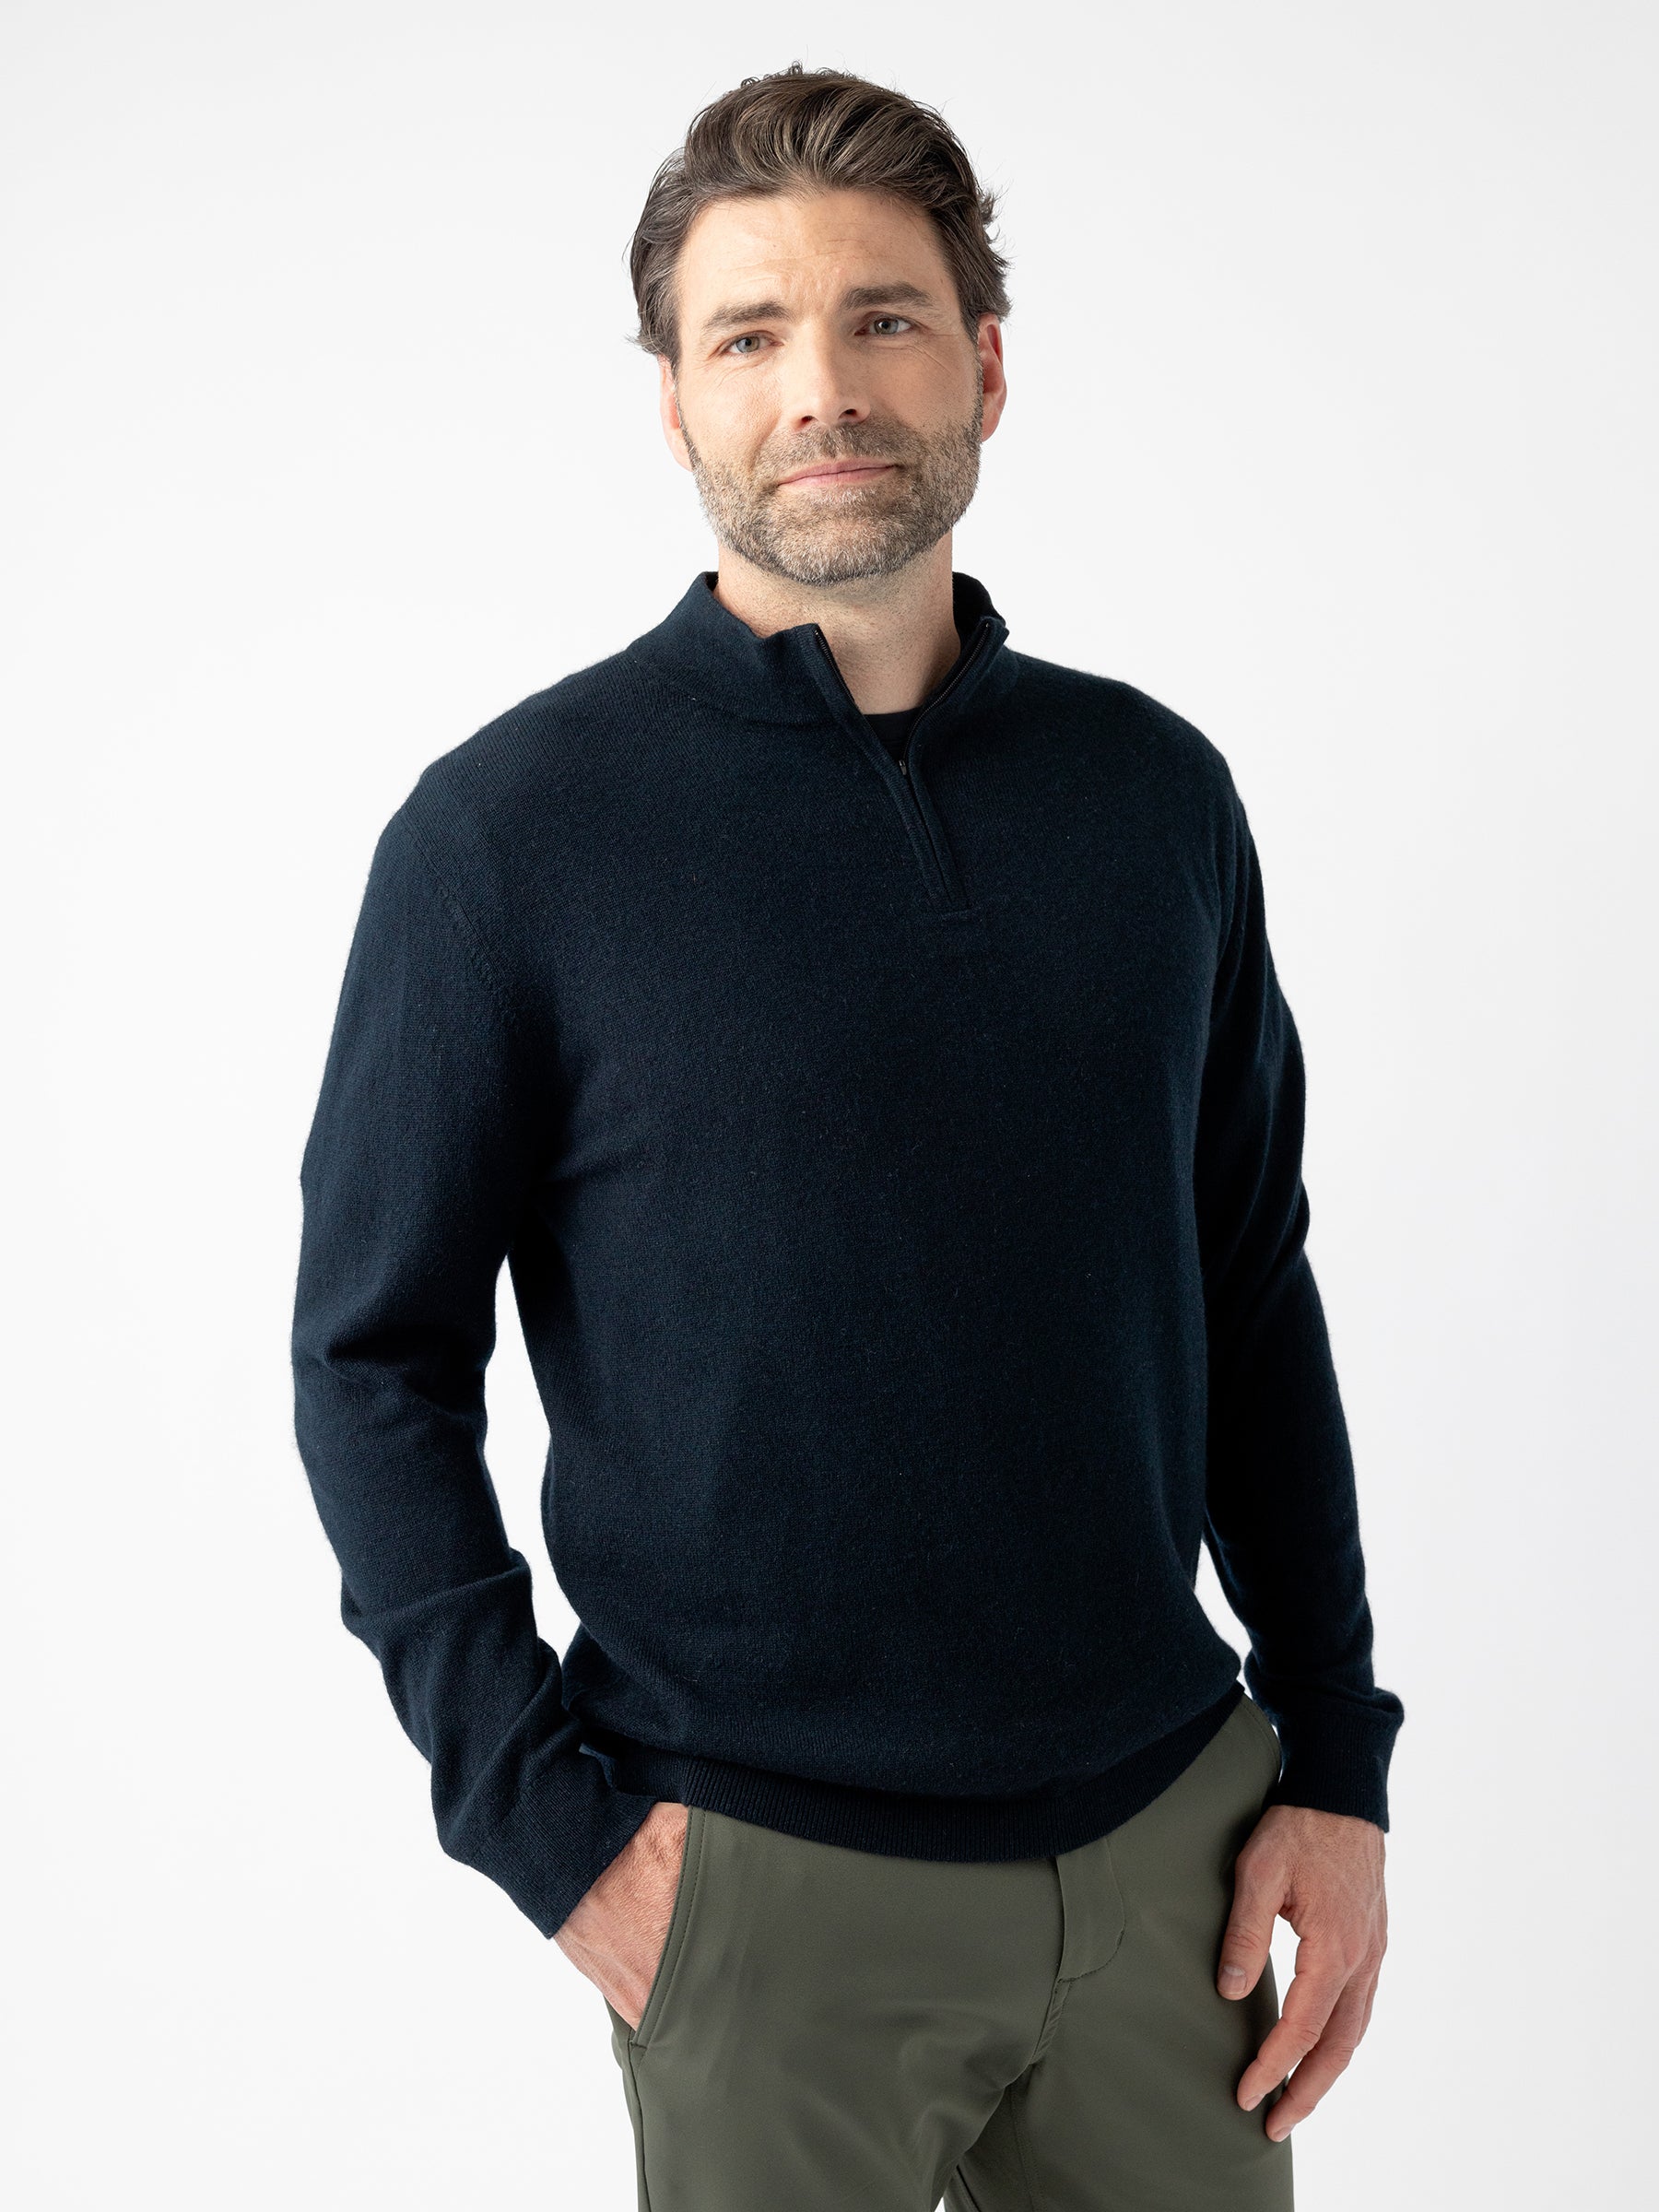 A man with short, dark hair and a beard is standing against a plain white background. He is wearing a Men's Quarter Zip Sweater by Cozy Earth, which is dark and long-sleeved, paired with olive-green pants. His hands are in his pockets, and he has a neutral expression on his face. |Color:Jet Black